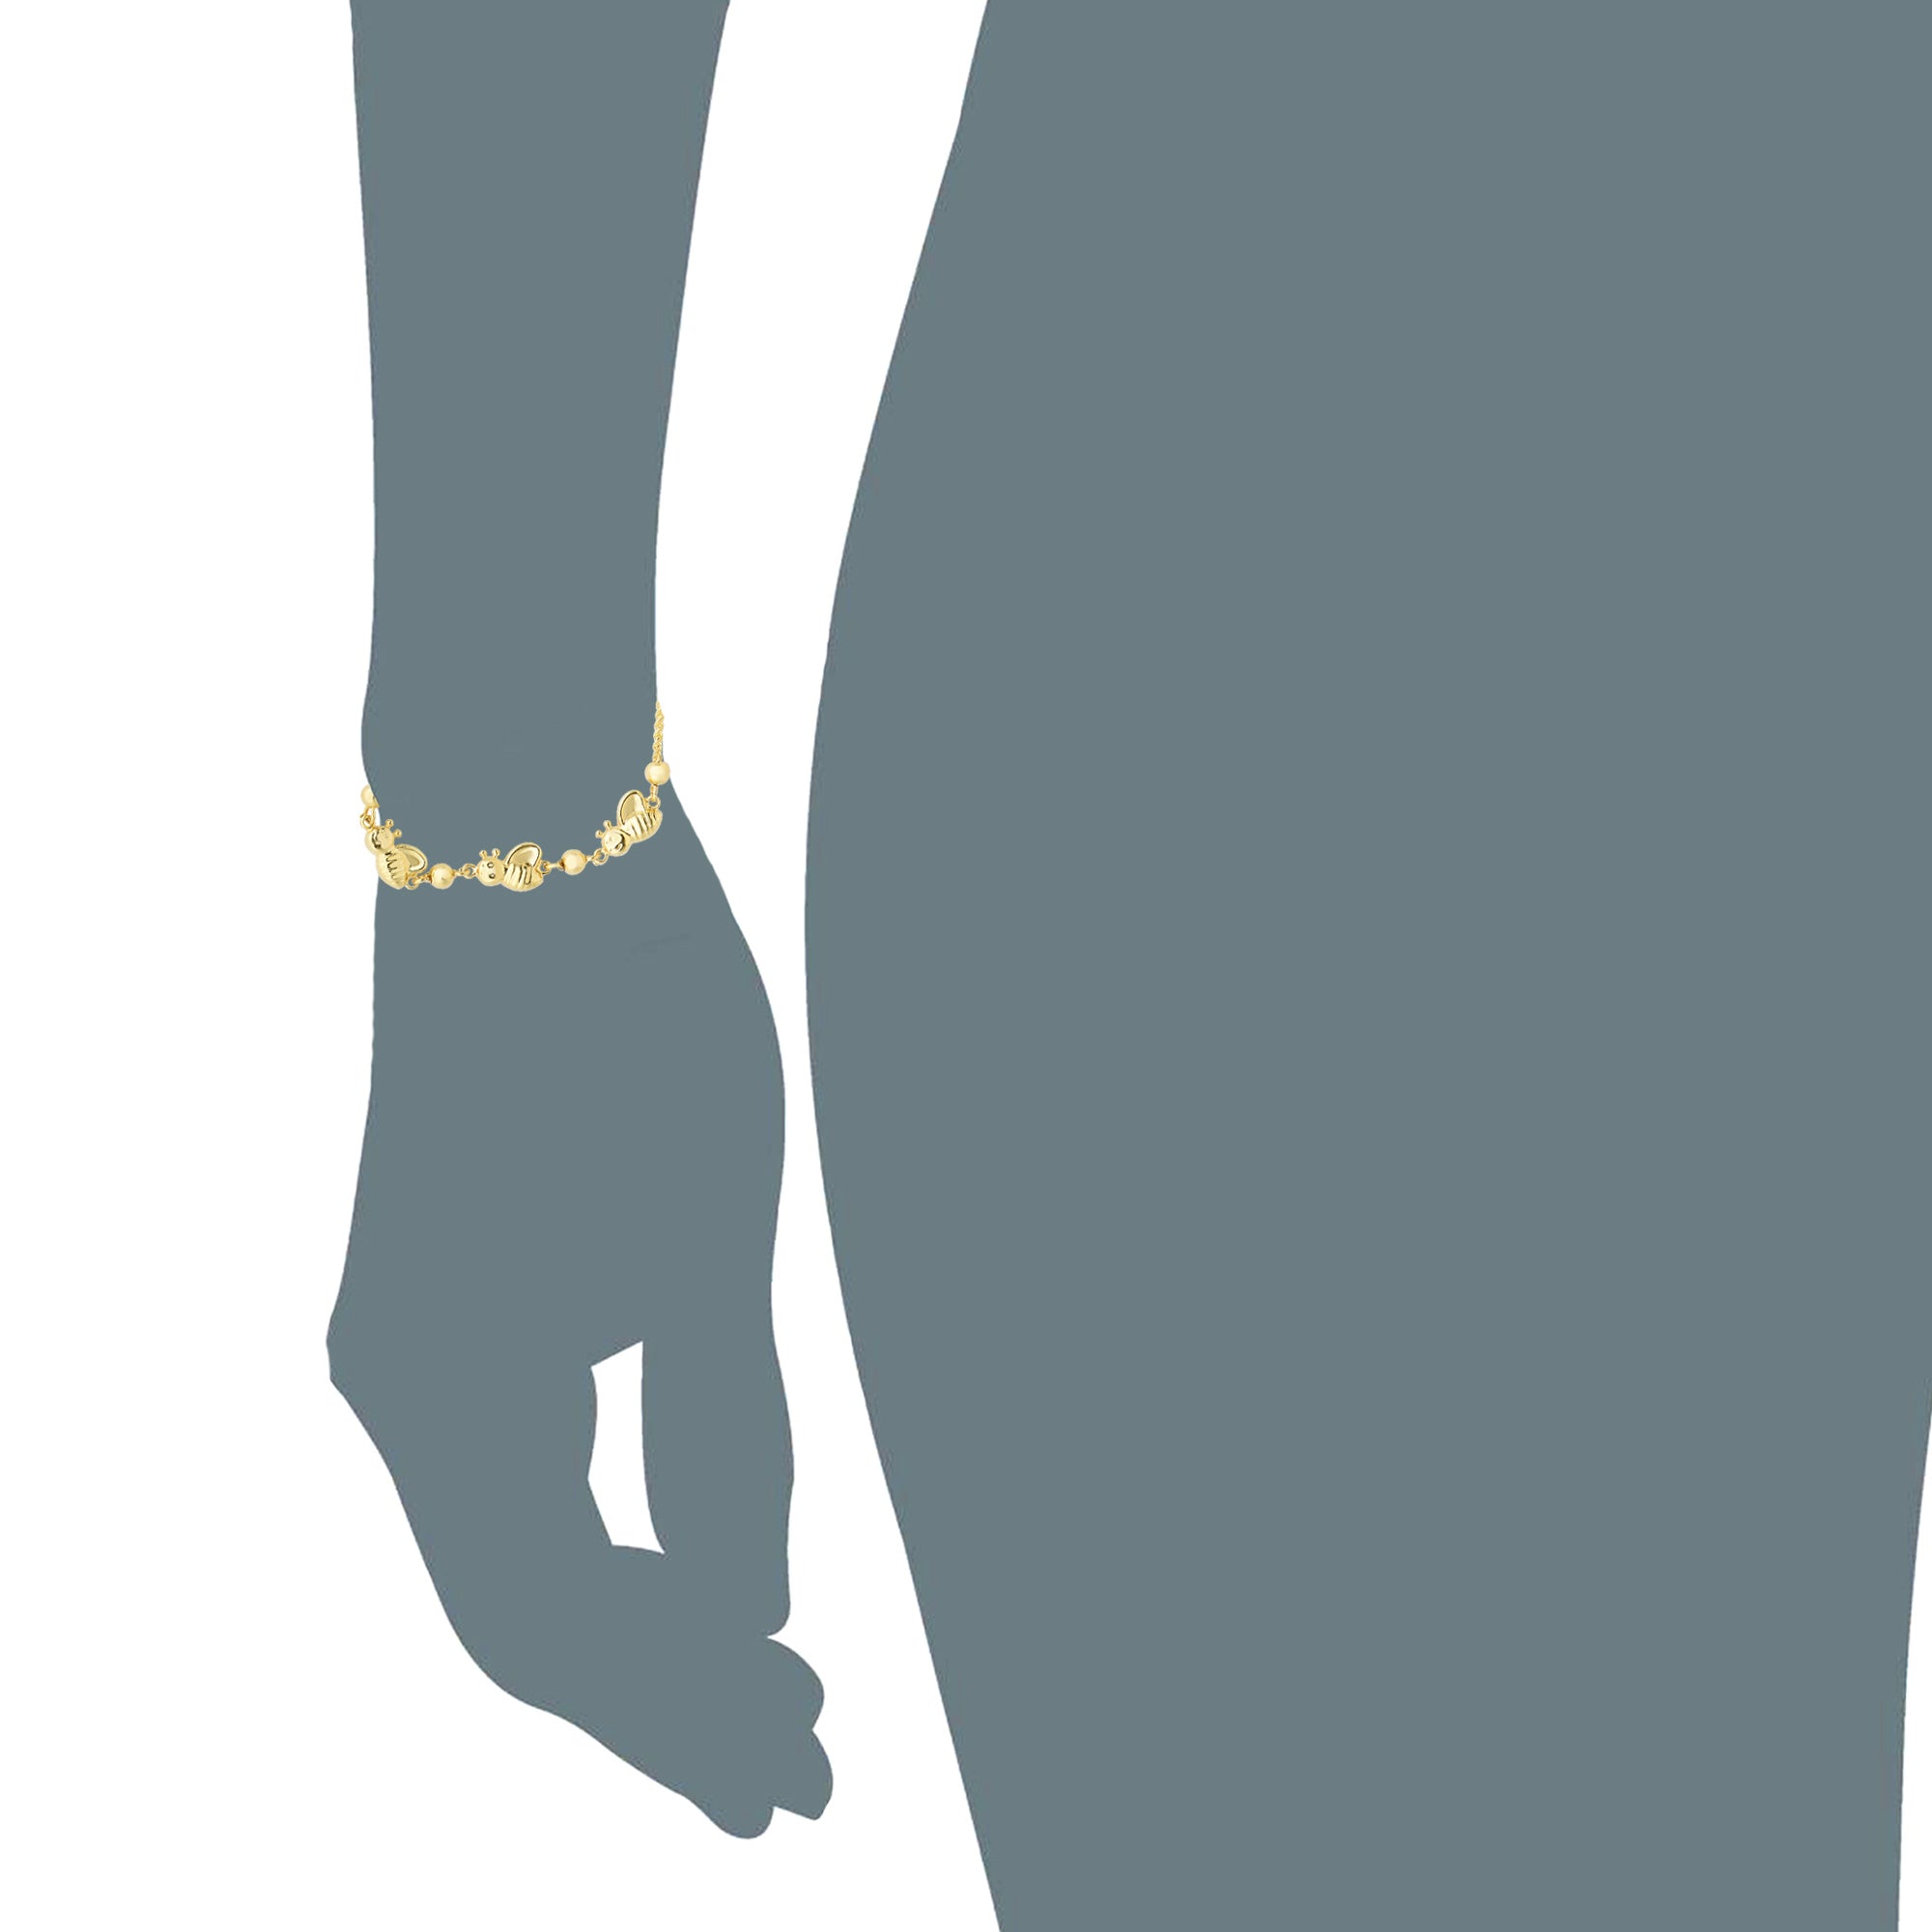 Bumble Bee Charms Theme Bolo Friendship Adjustable Bracelet In 14K Yellow Gold, 9.25"